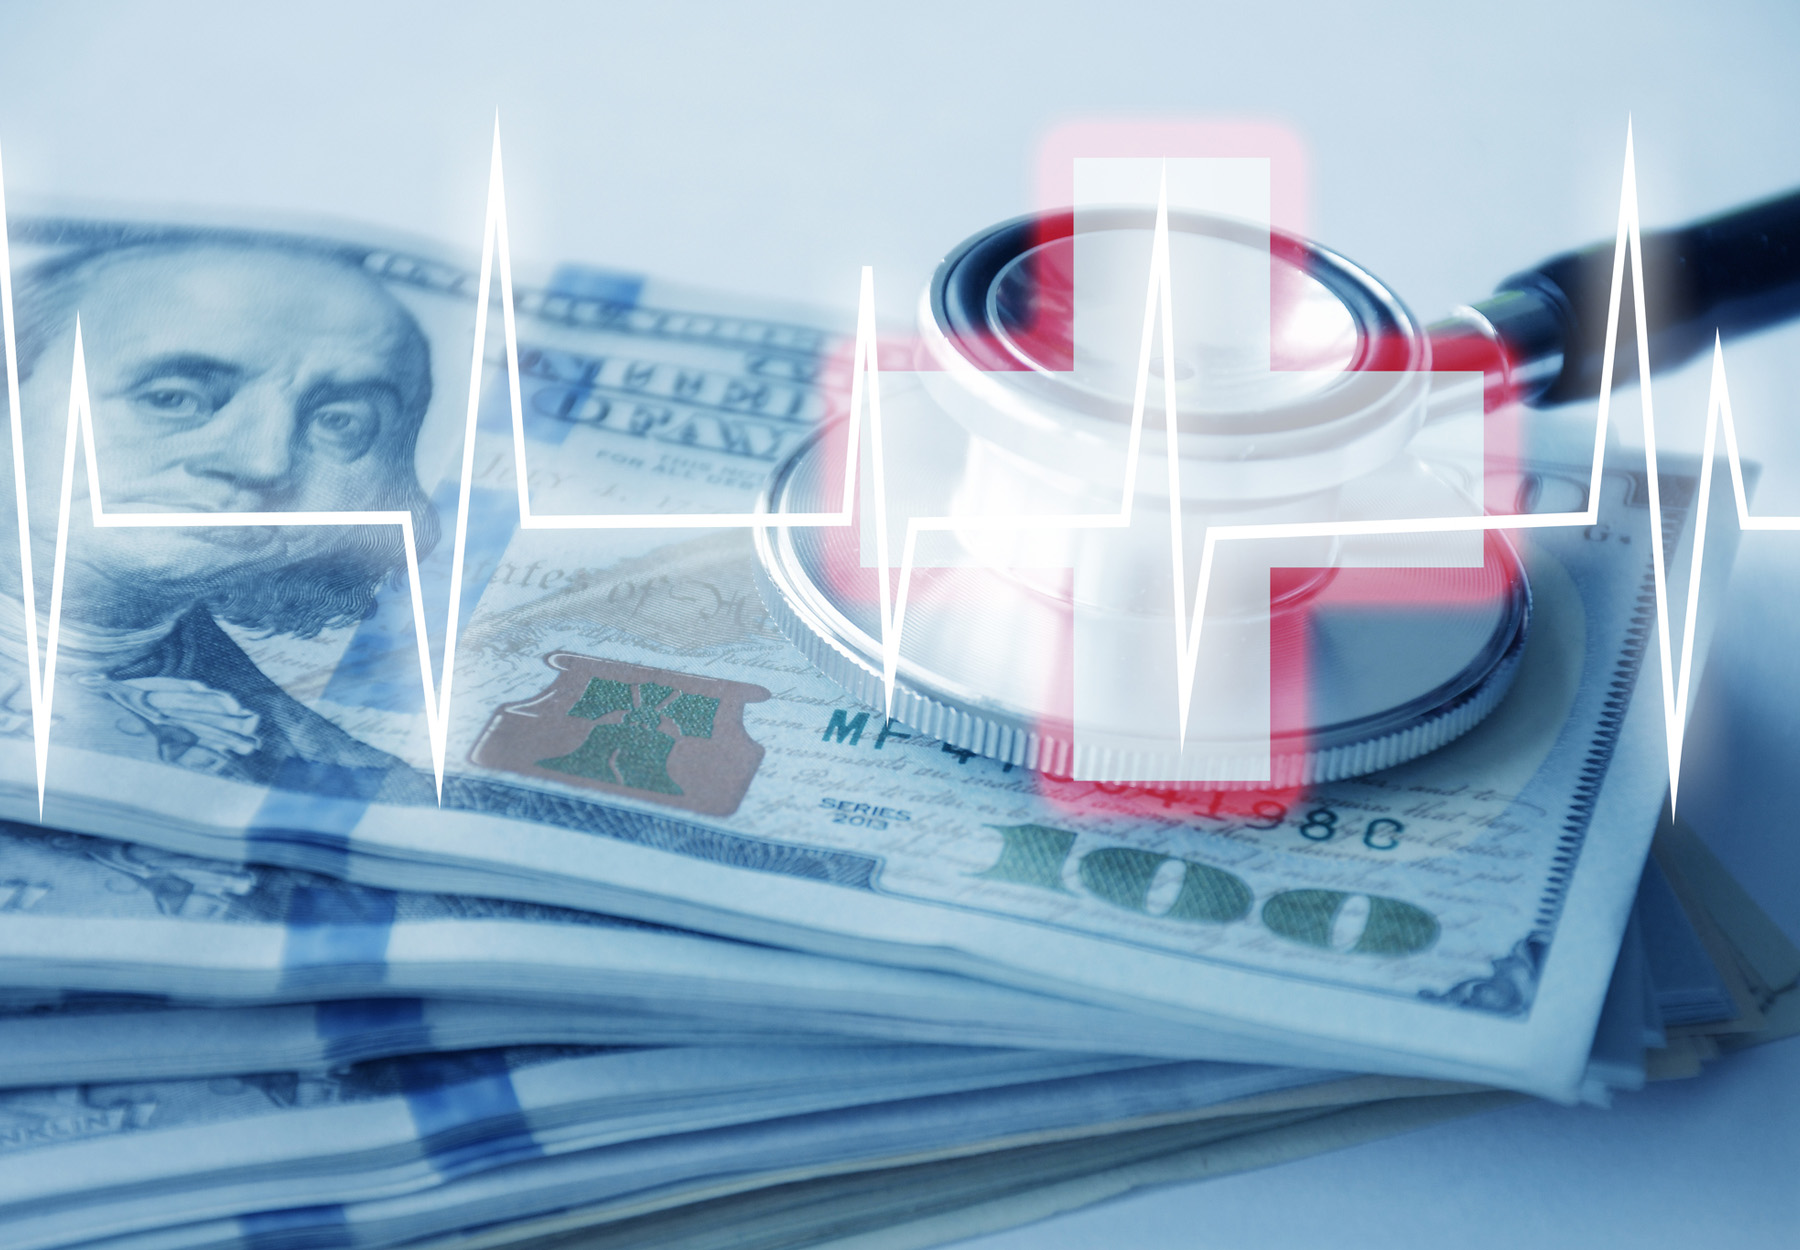 Stock photo illustration with stack of US money and stethoscope and heart rate monitor sign